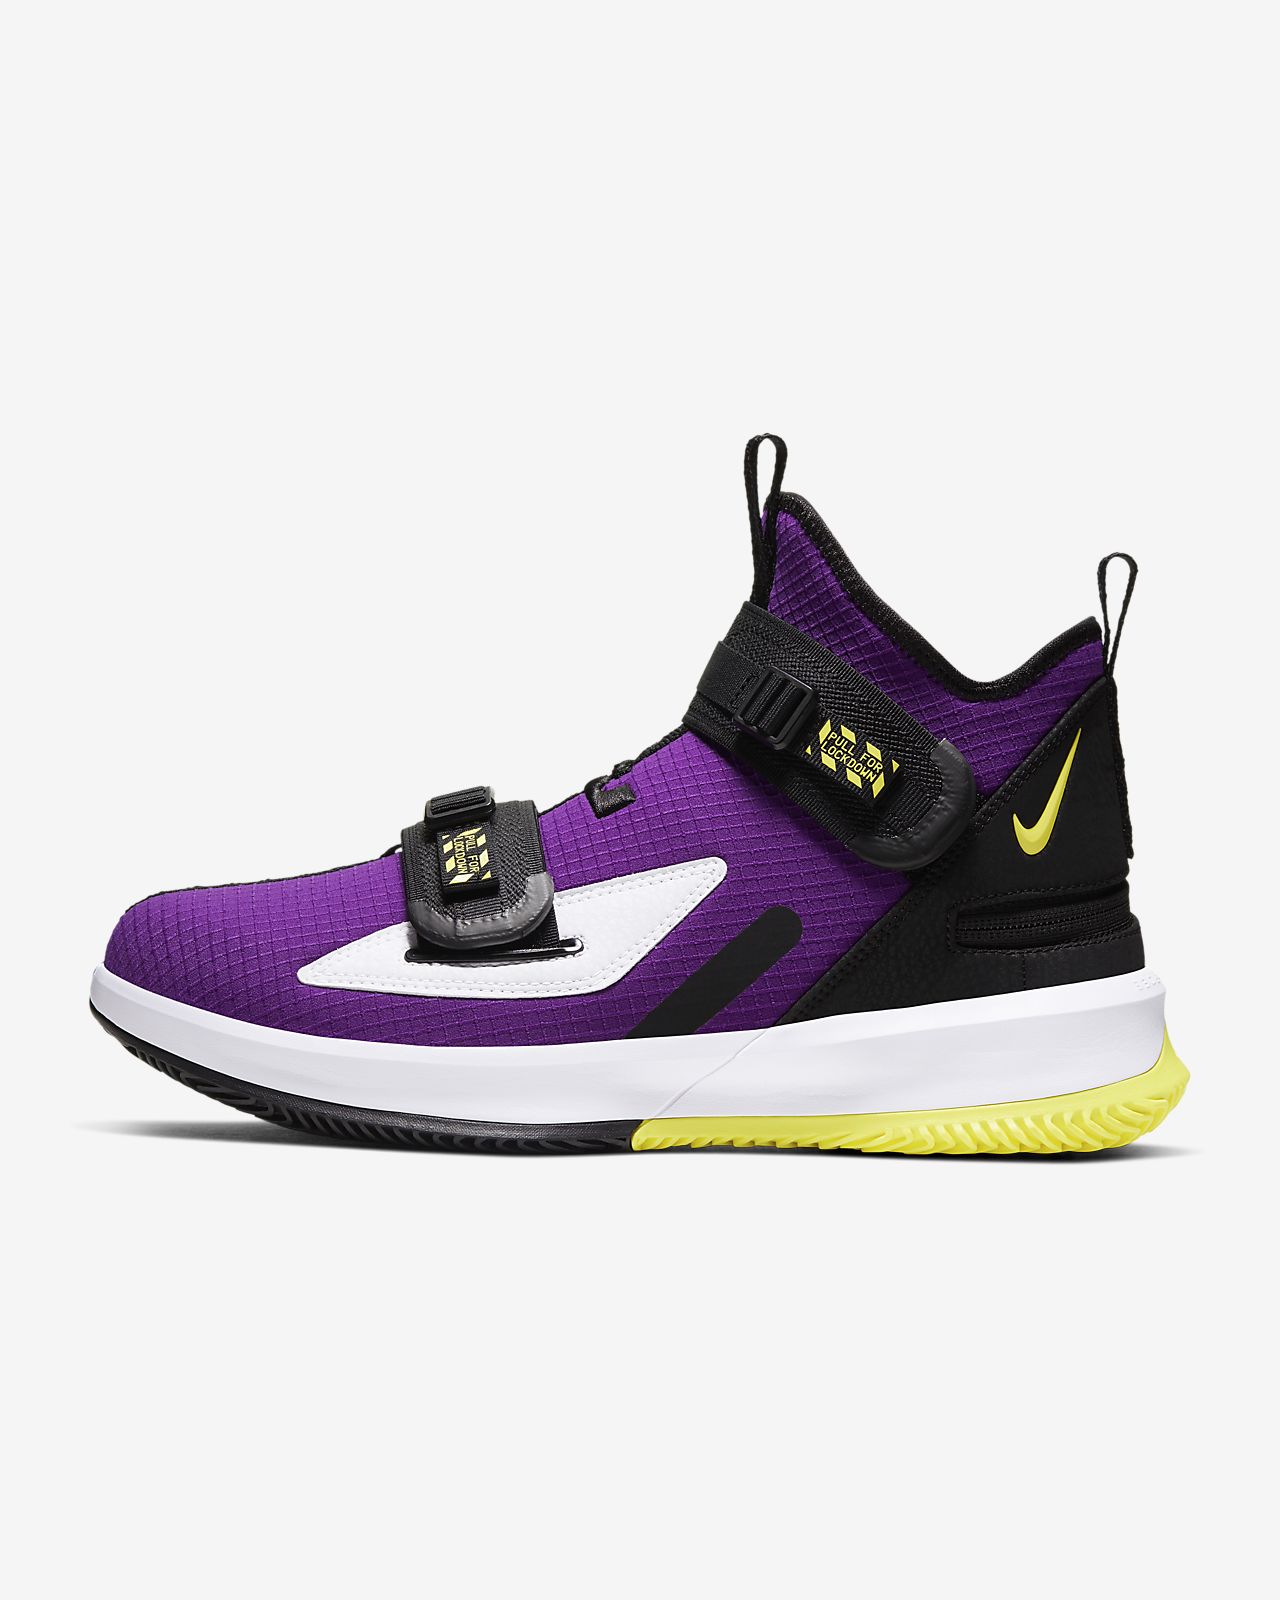 lebron yellow and purple shoes